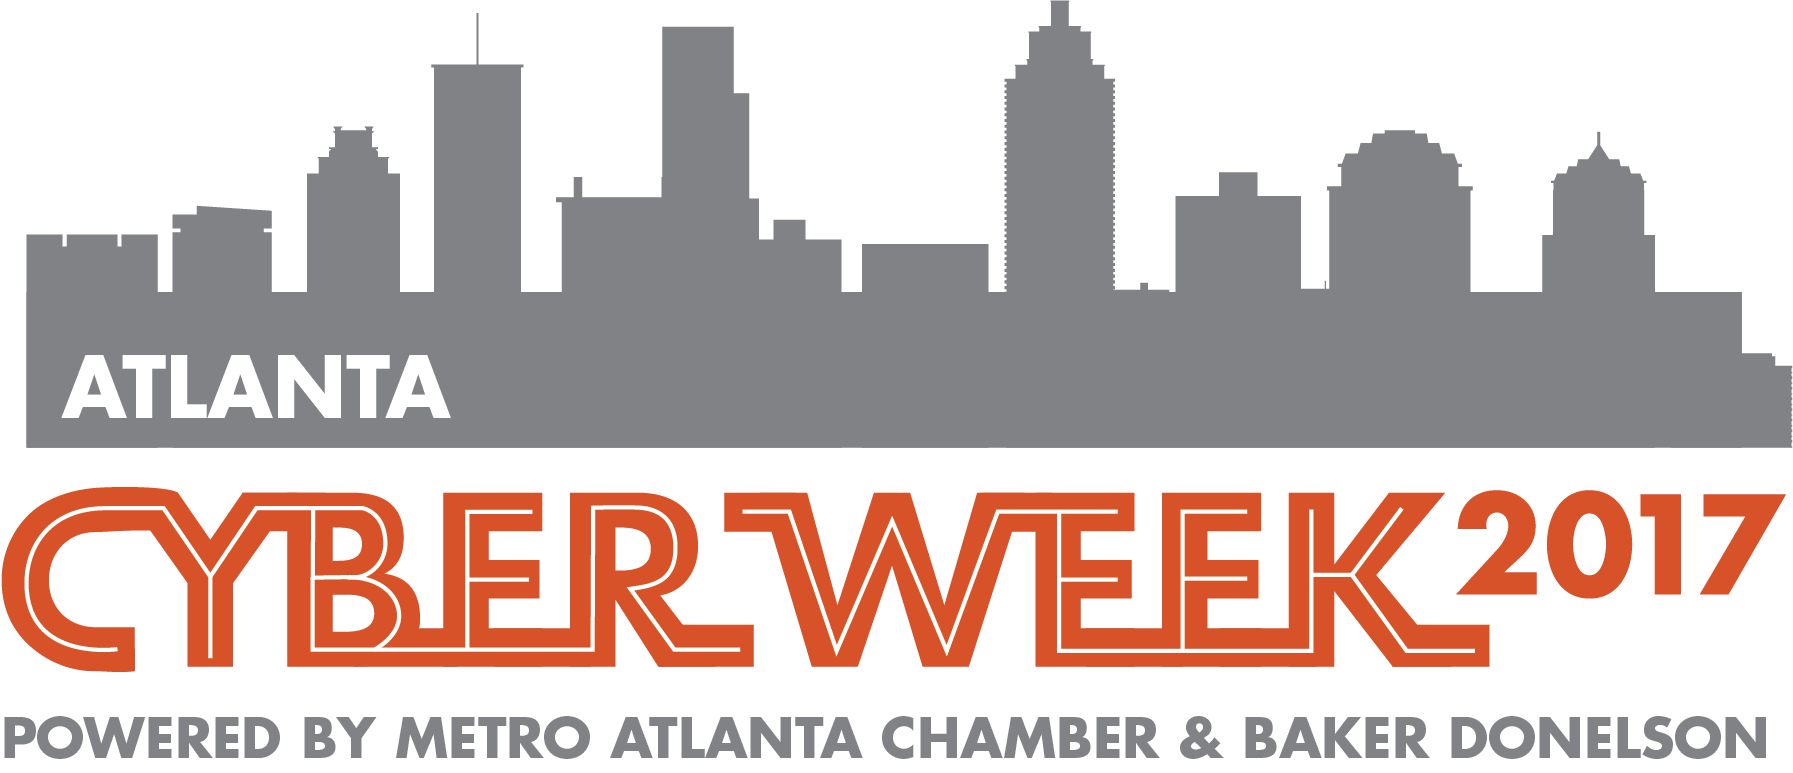 Atlanta Cyber Week Unveils Five New Events; Anchor Conference, Cybercon